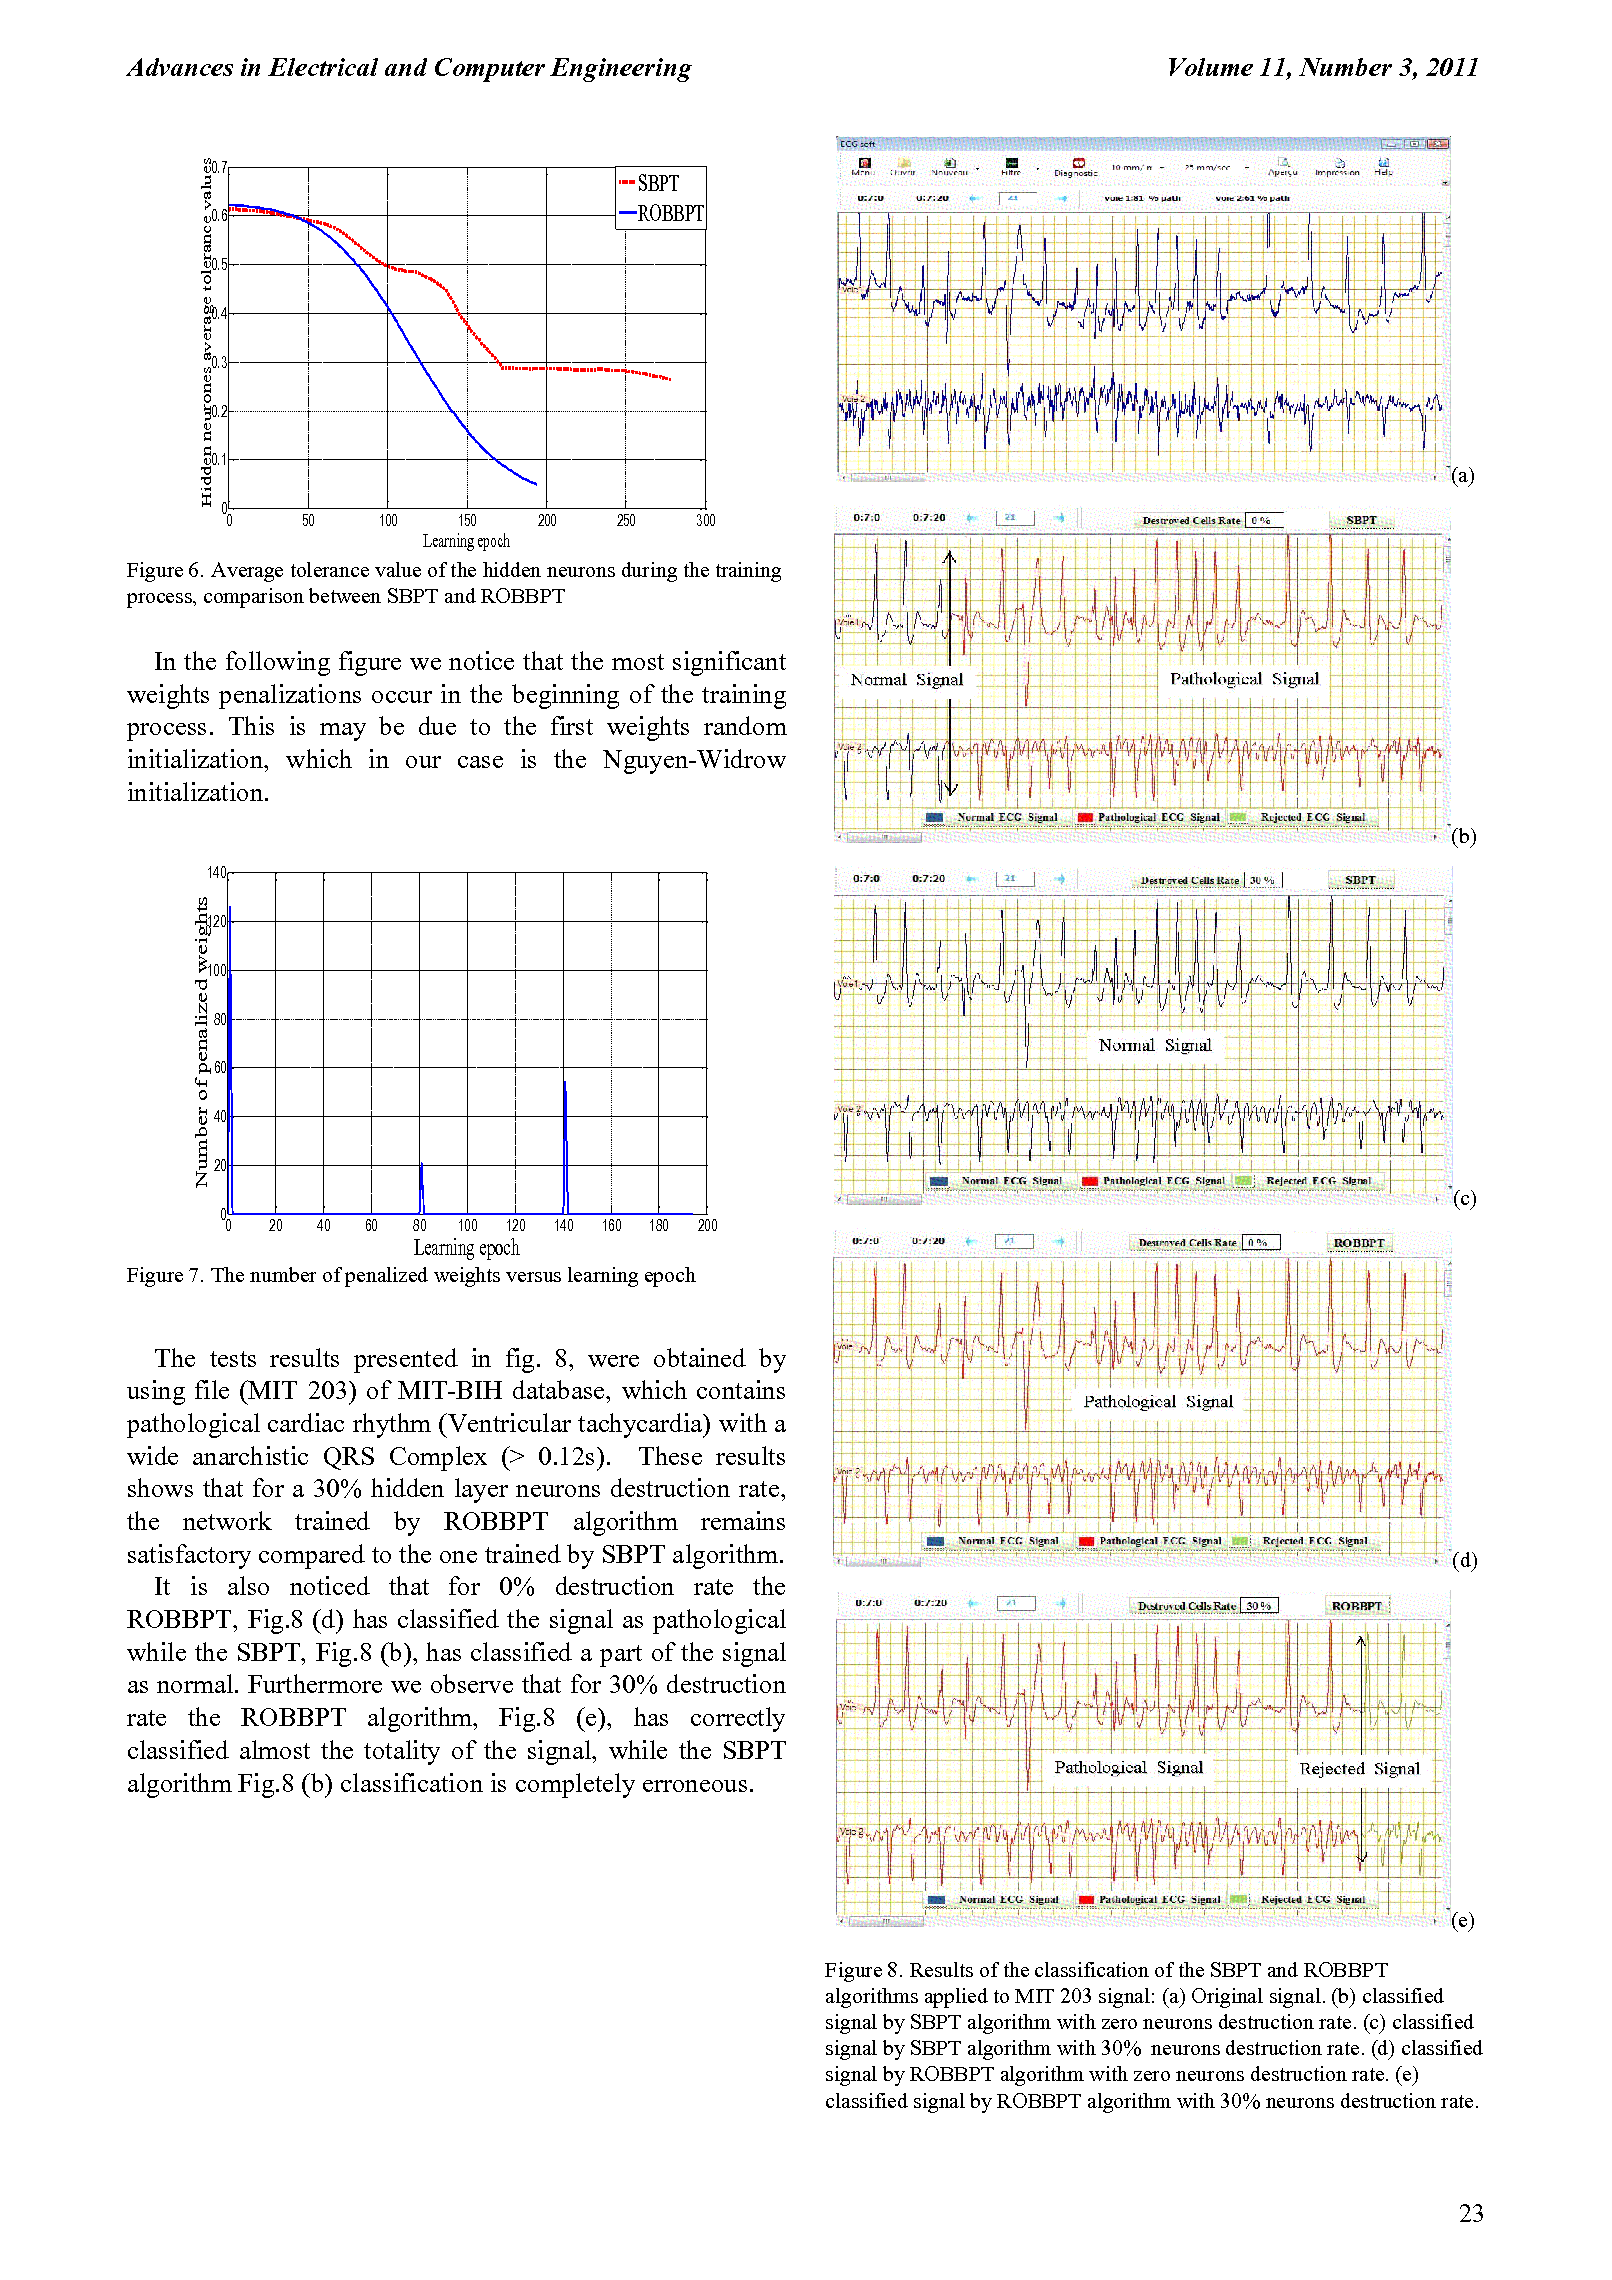 PDF Quickview for paper with DOI:10.4316/AECE.2011.03003